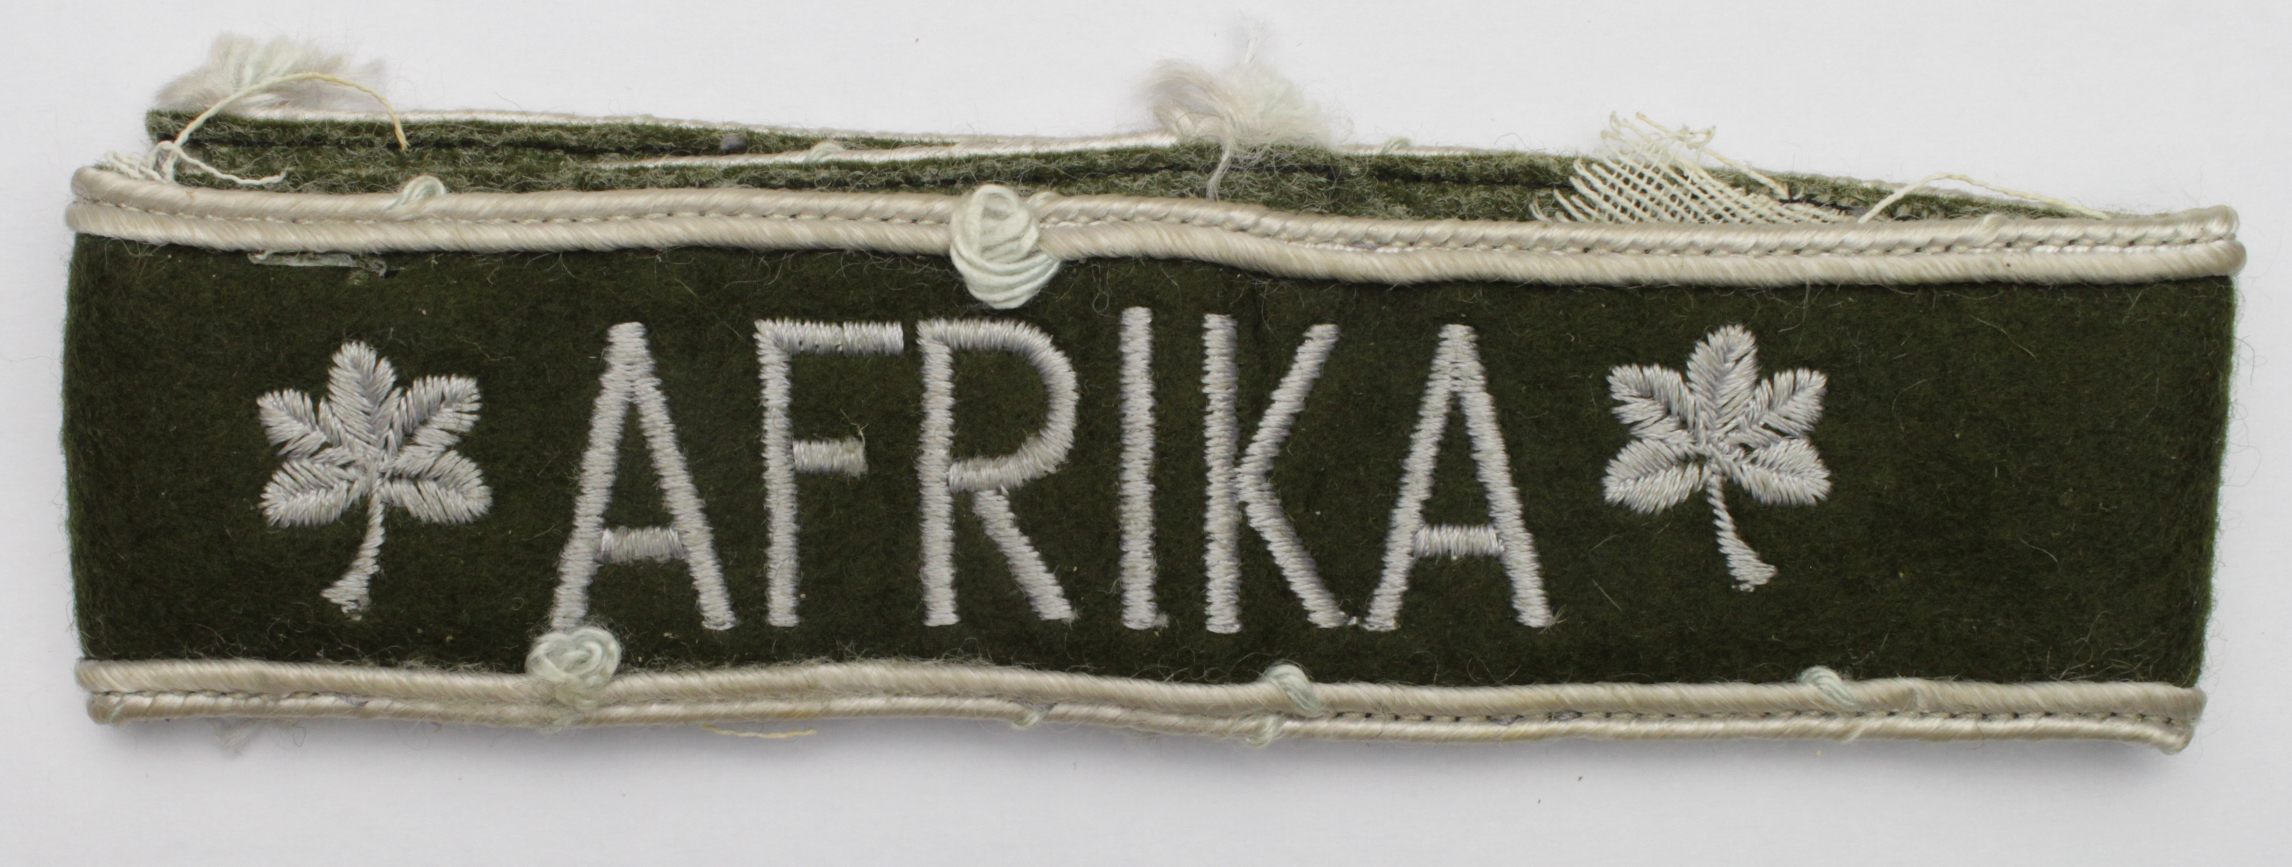 German Afrika Cuff band, wear from use / removal